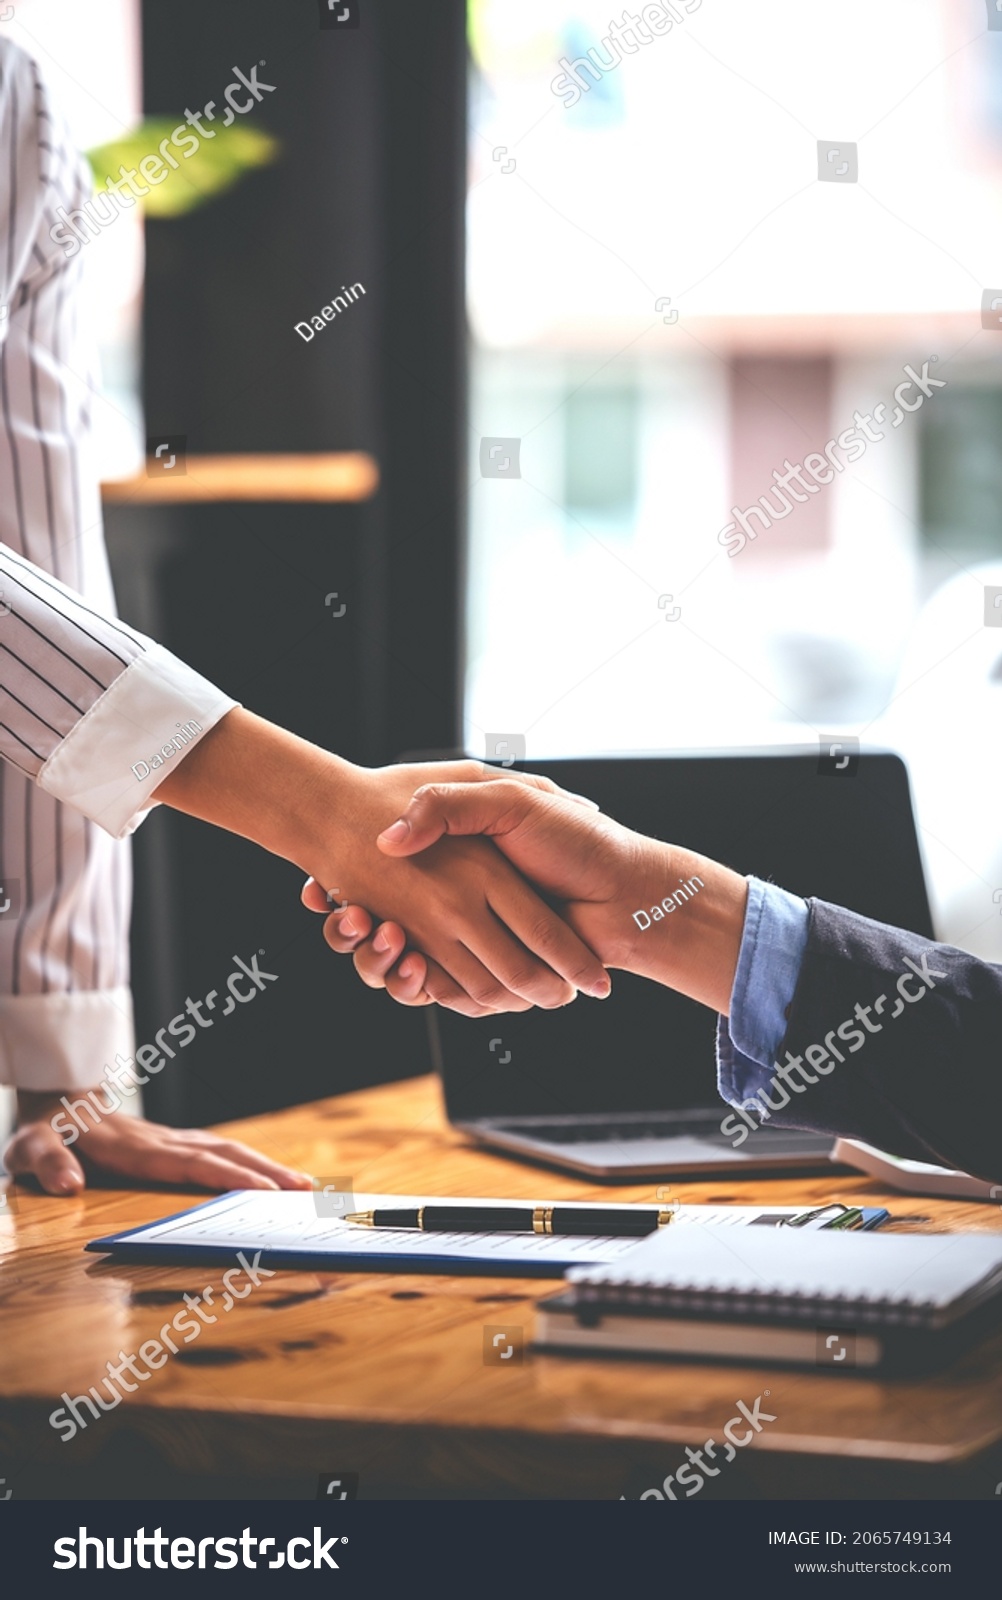 Business handshake picture agreeing to buy and sell real estate Venture International Investment contract, meeting, vision, investment for profit #2065749134